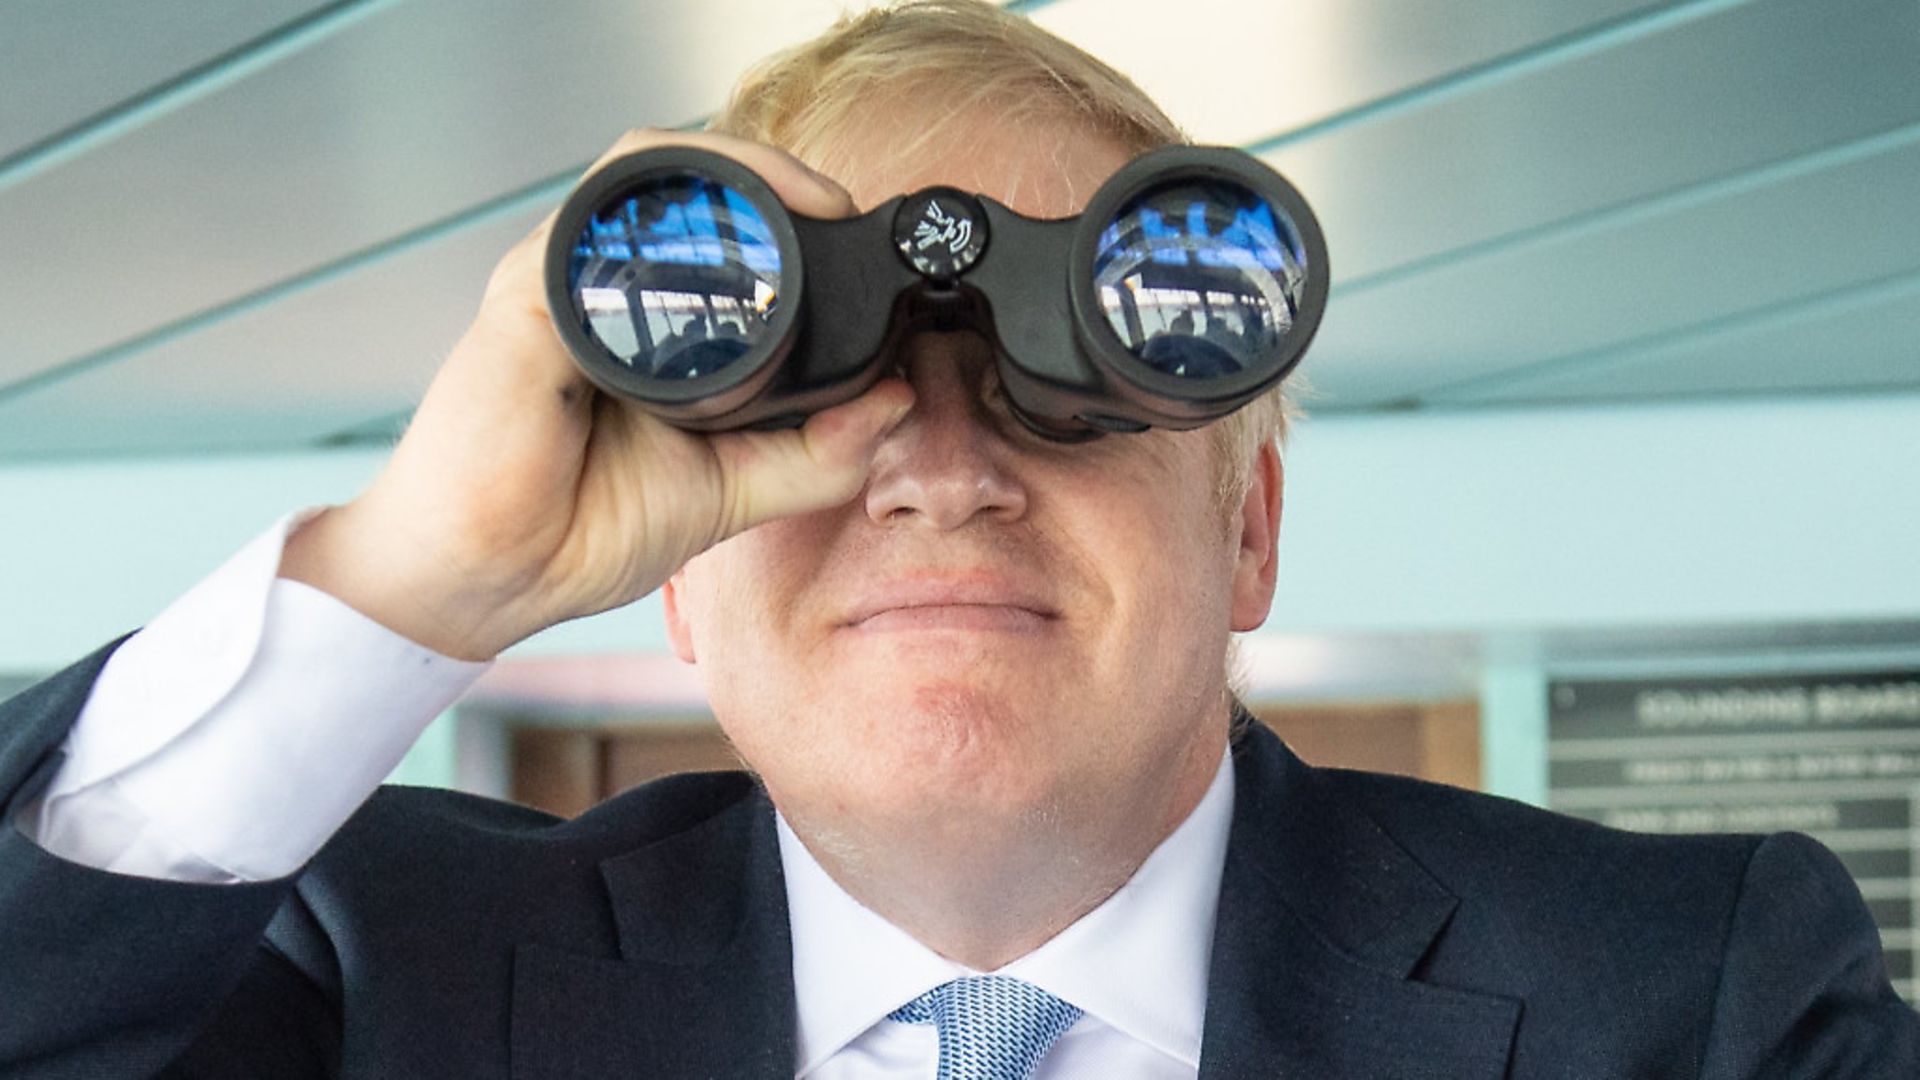 Boris Johnson uses a pair of binoculars on the bridge of the Isle of Wight ferry as it sets sail from Portsmouth. Photograph: Dominic Lipinski/PA. - Credit: PA